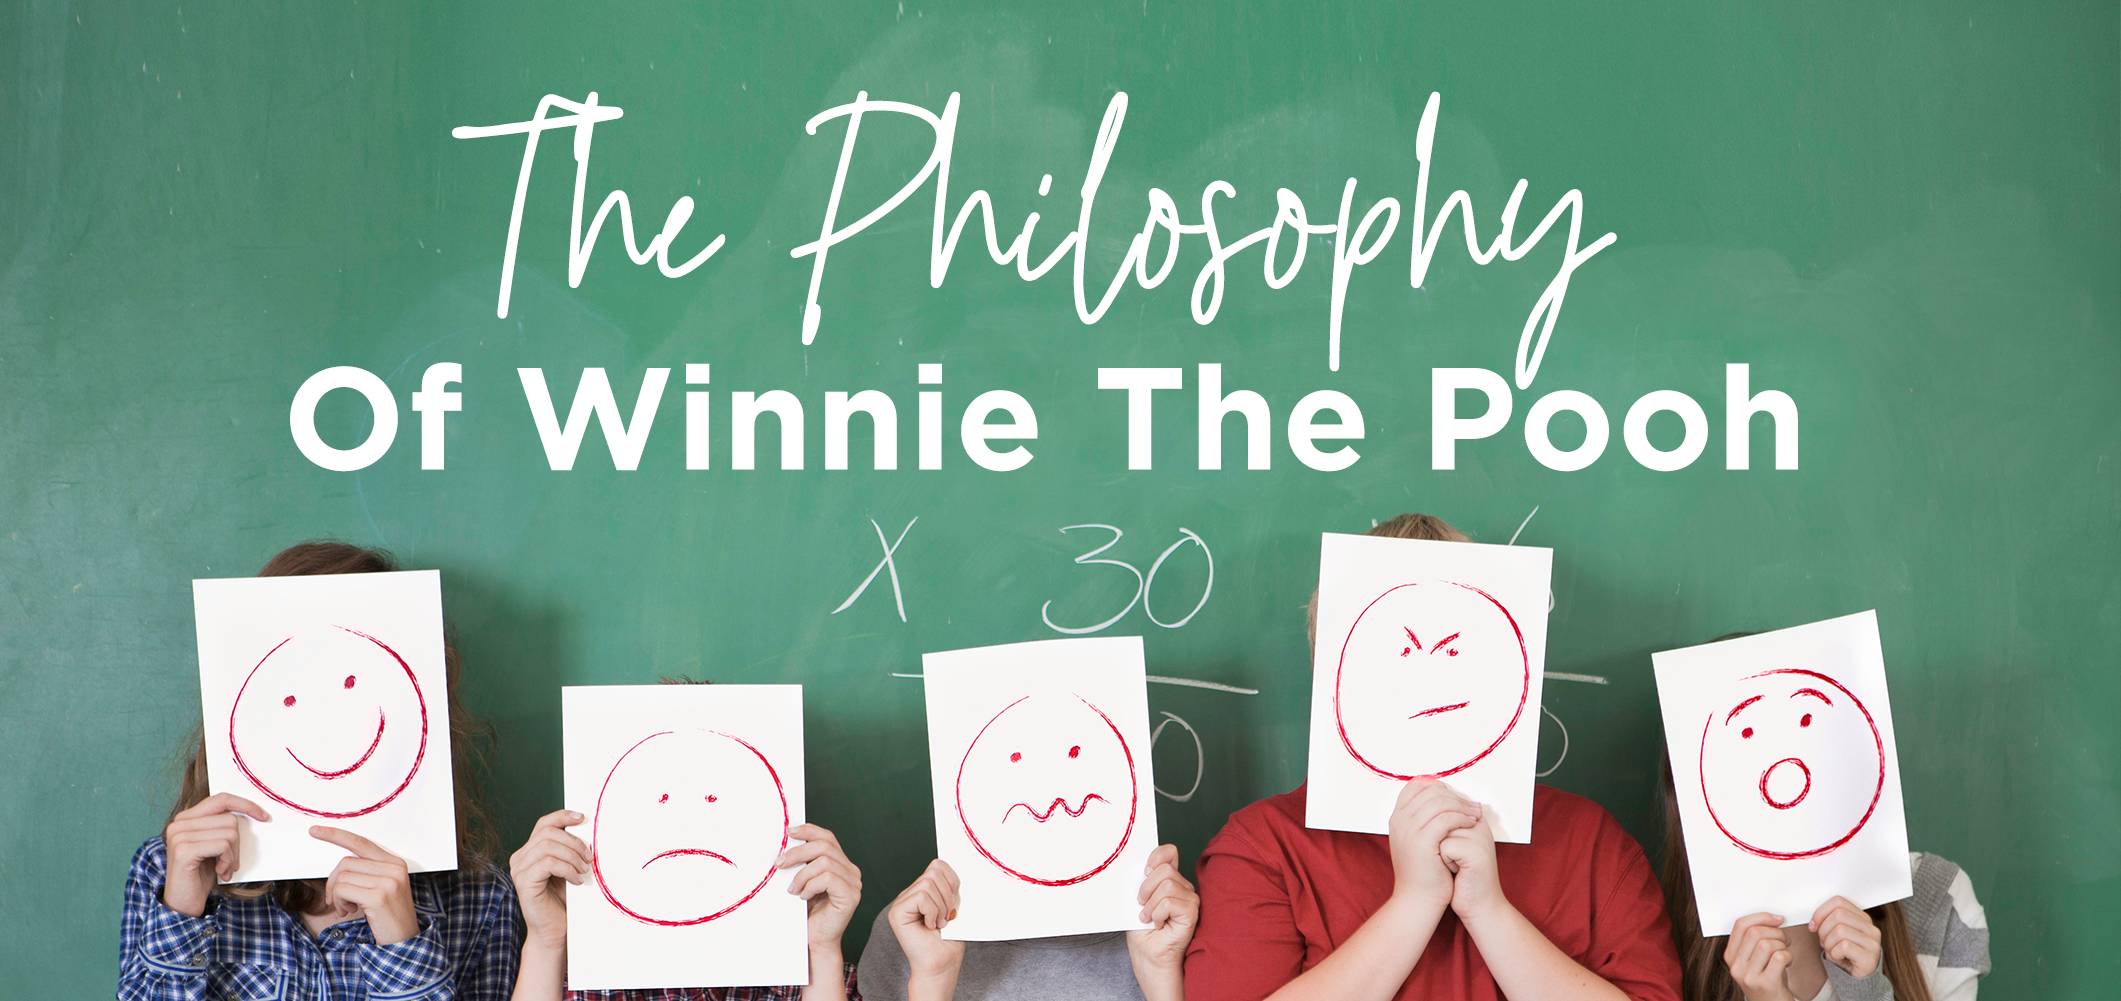 You are currently viewing The Philosophy of Winnie the Pooh